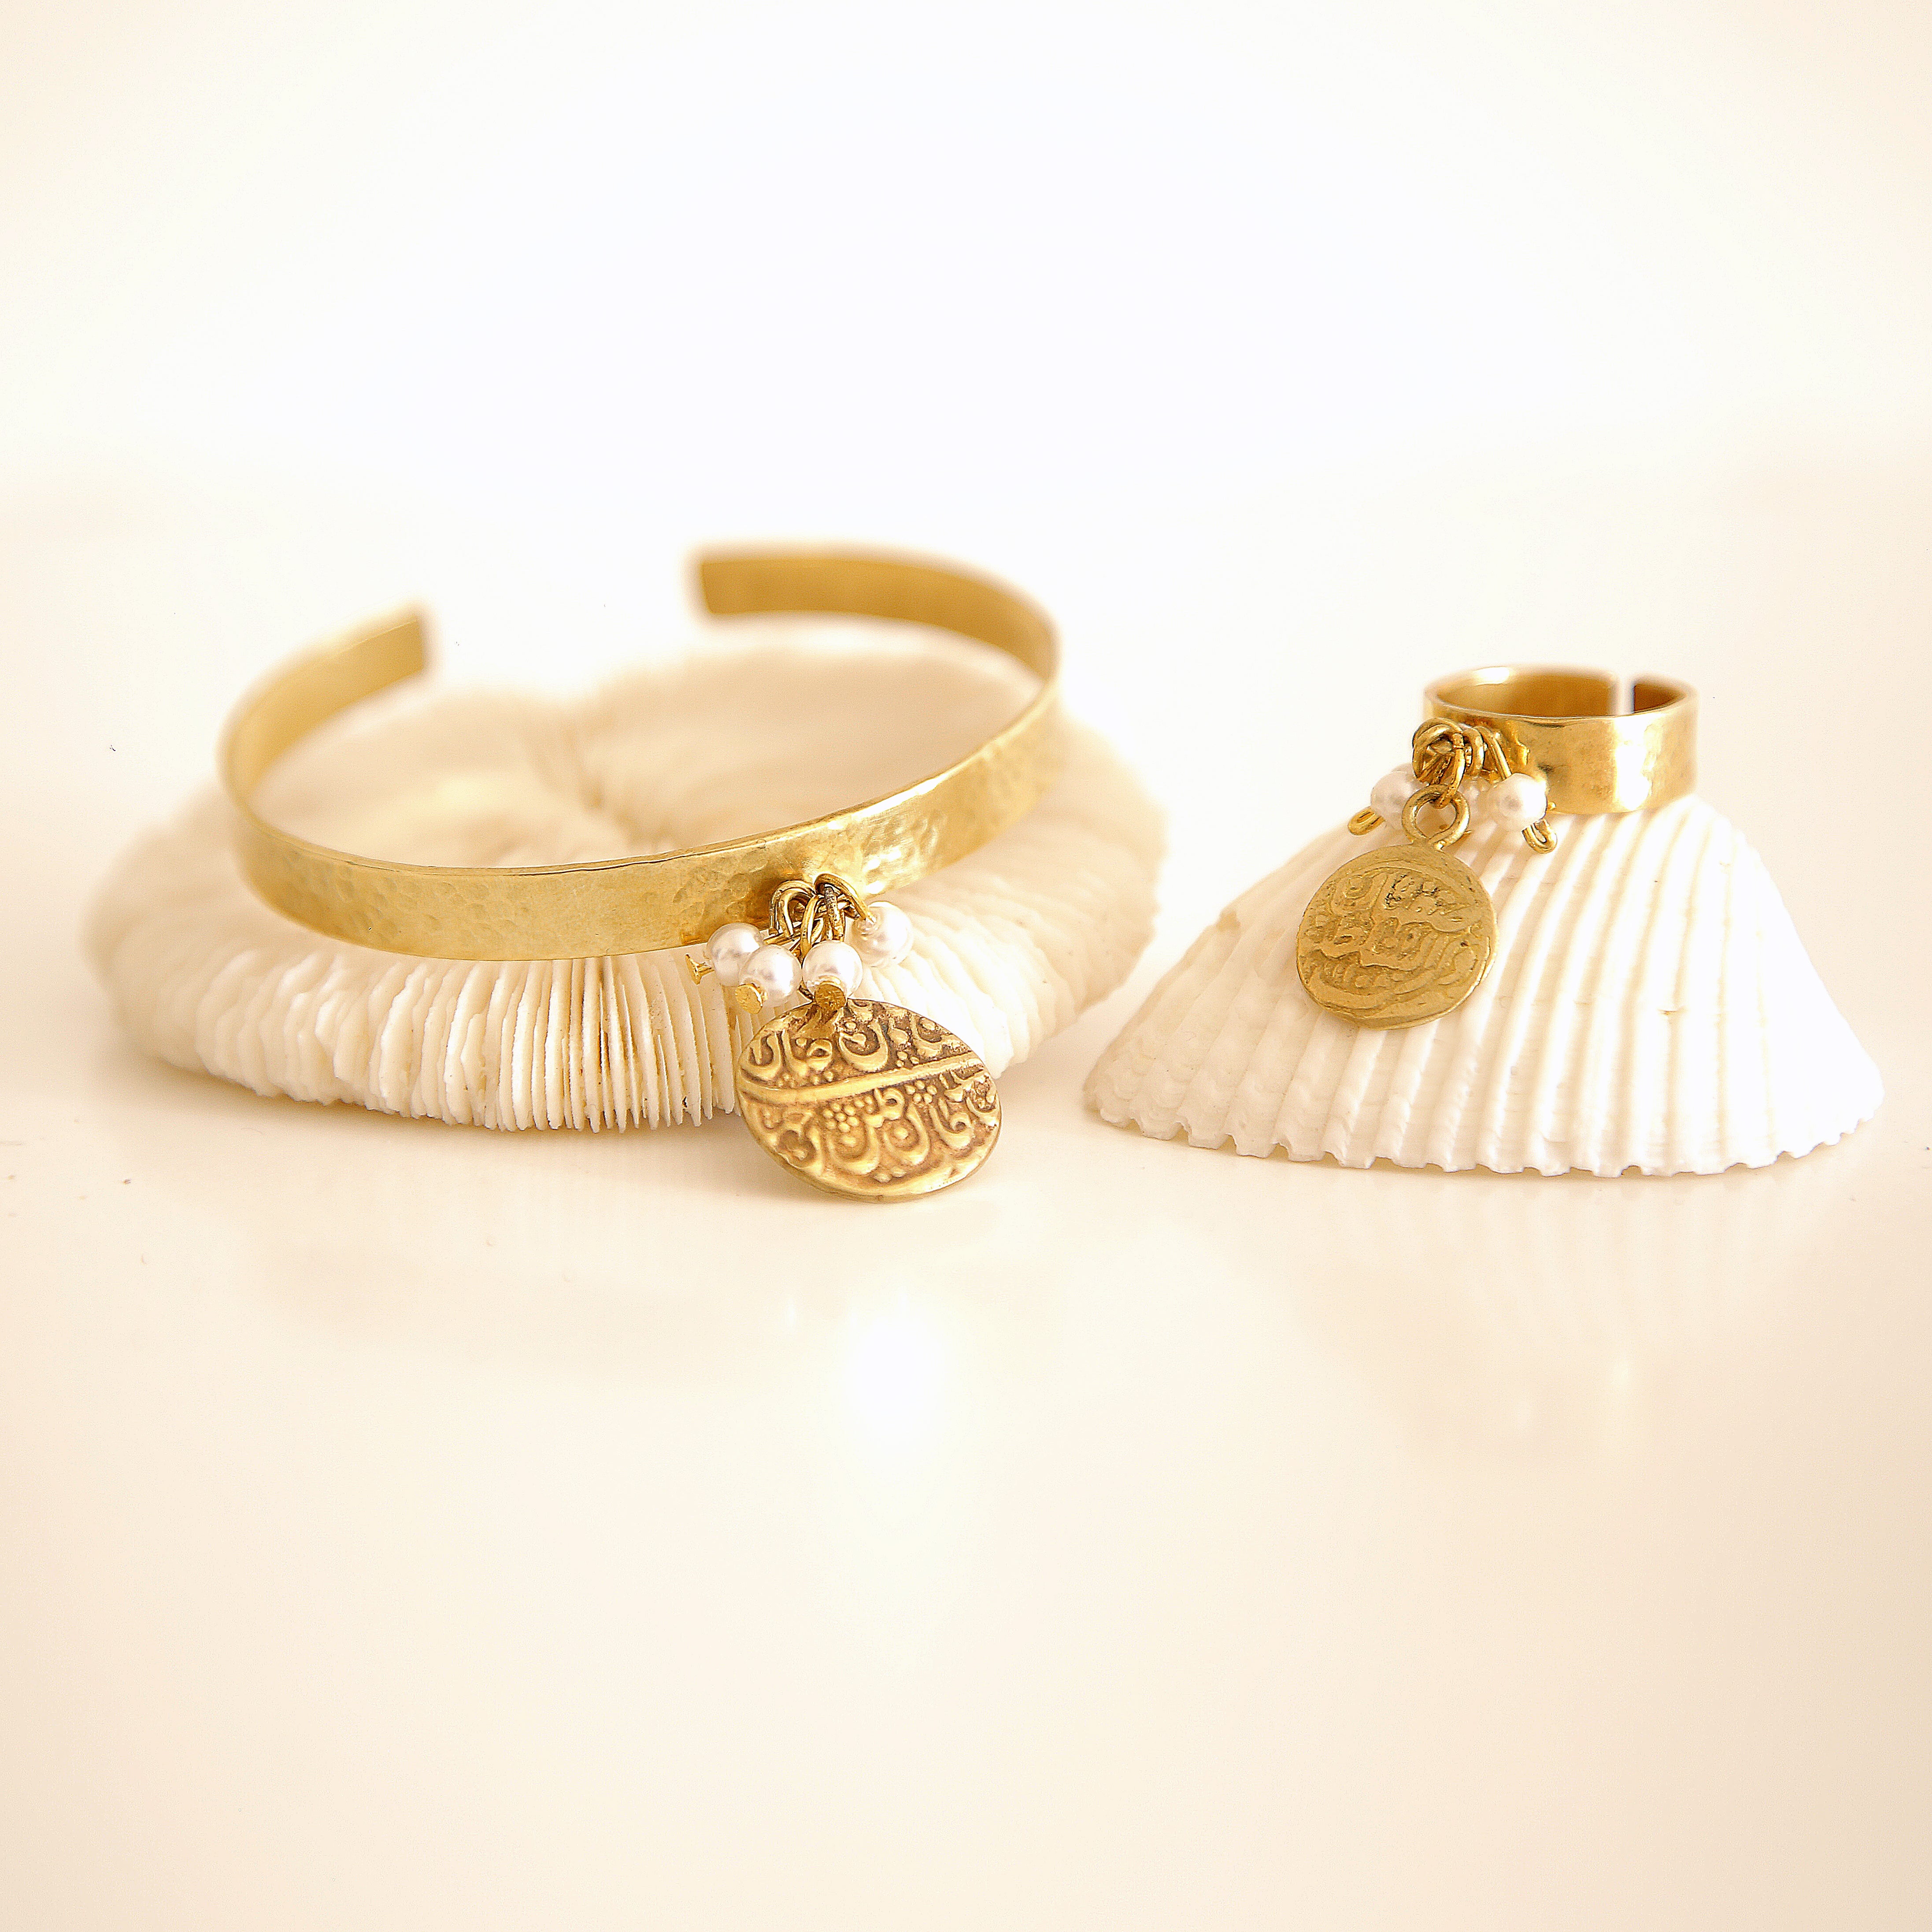 Persian Rings-Persian Brass Ring with Coin Charm and Pearl: Persian Jewelry-AFRA ART GALLERY